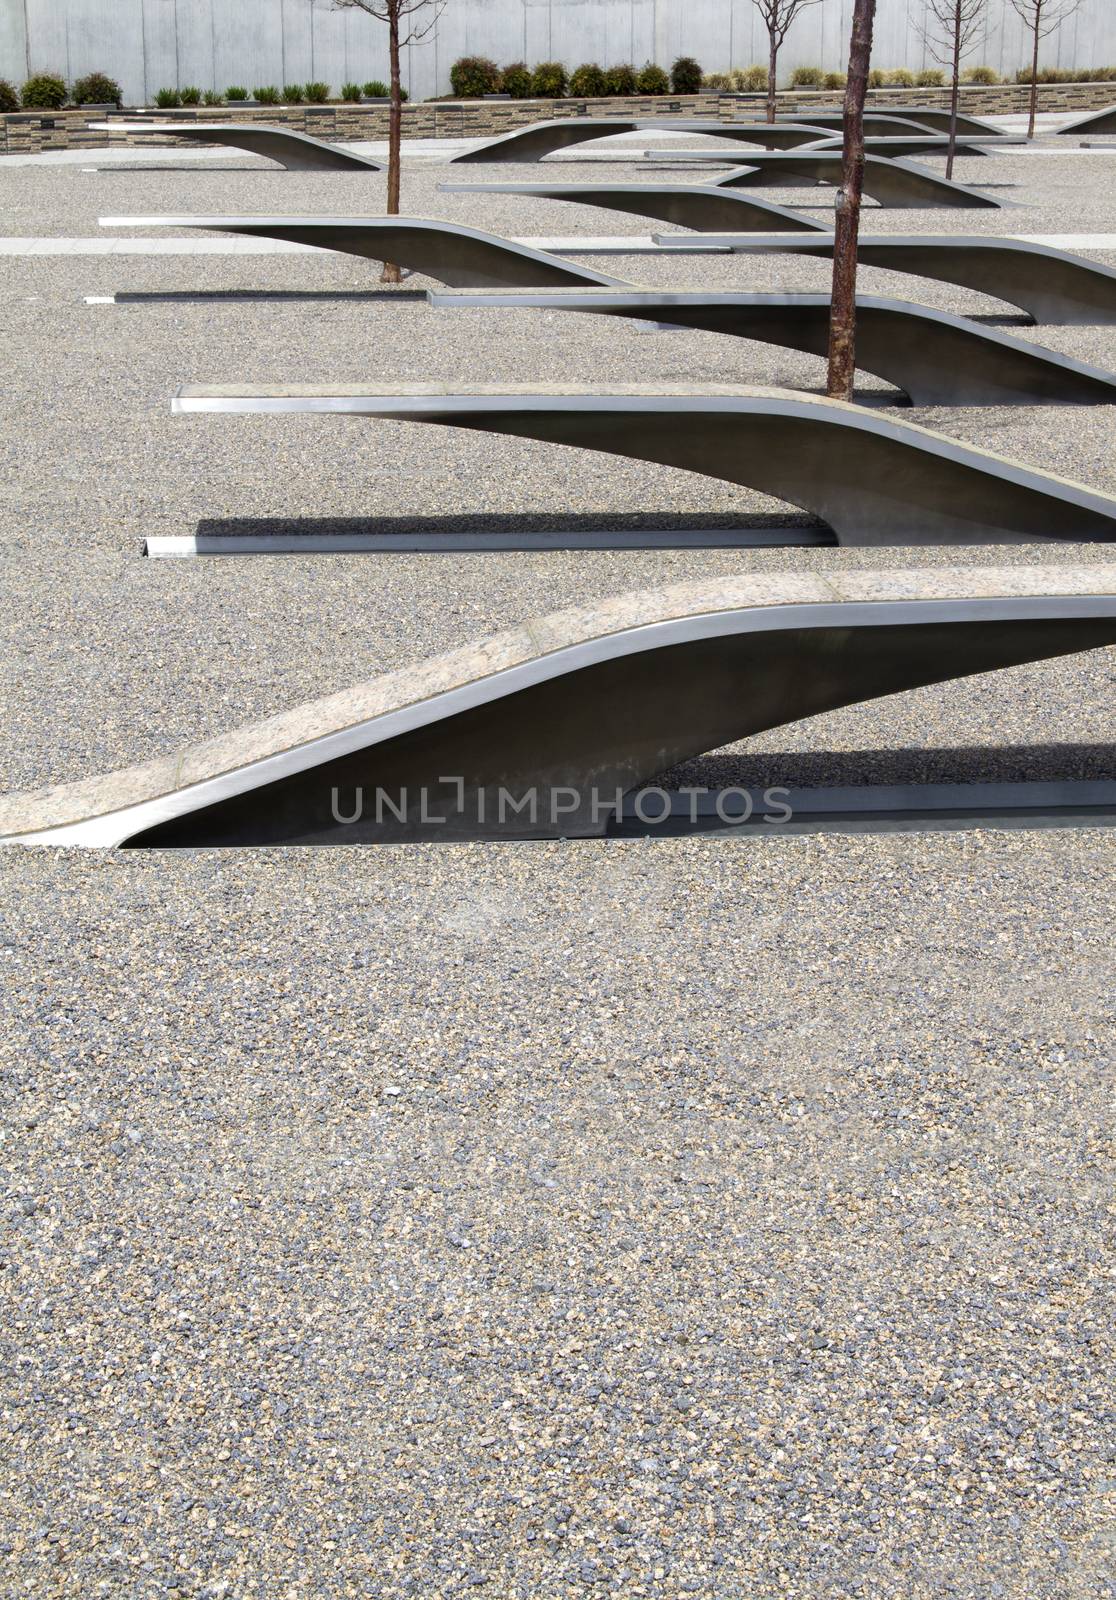 The Pentagon Memorial for the victims of terrorist attacks on September 11